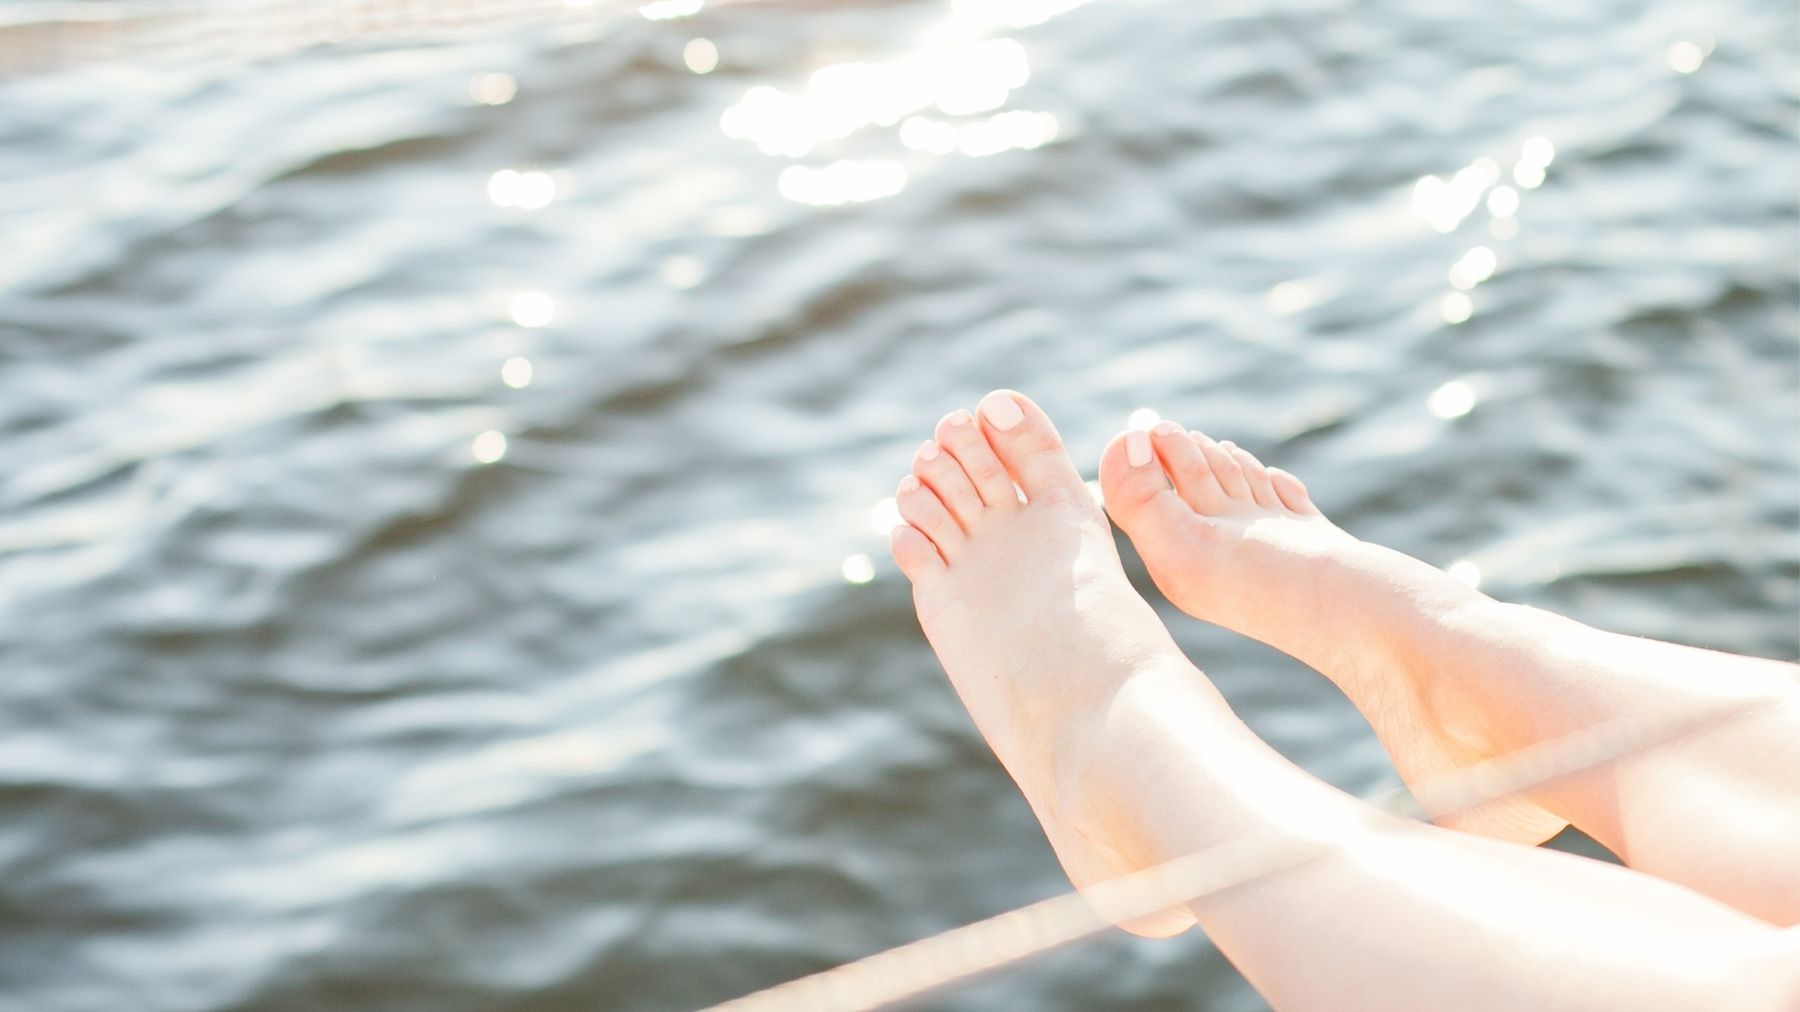 Foot Care: How to Remove Thick Dead Skin From Your Feet